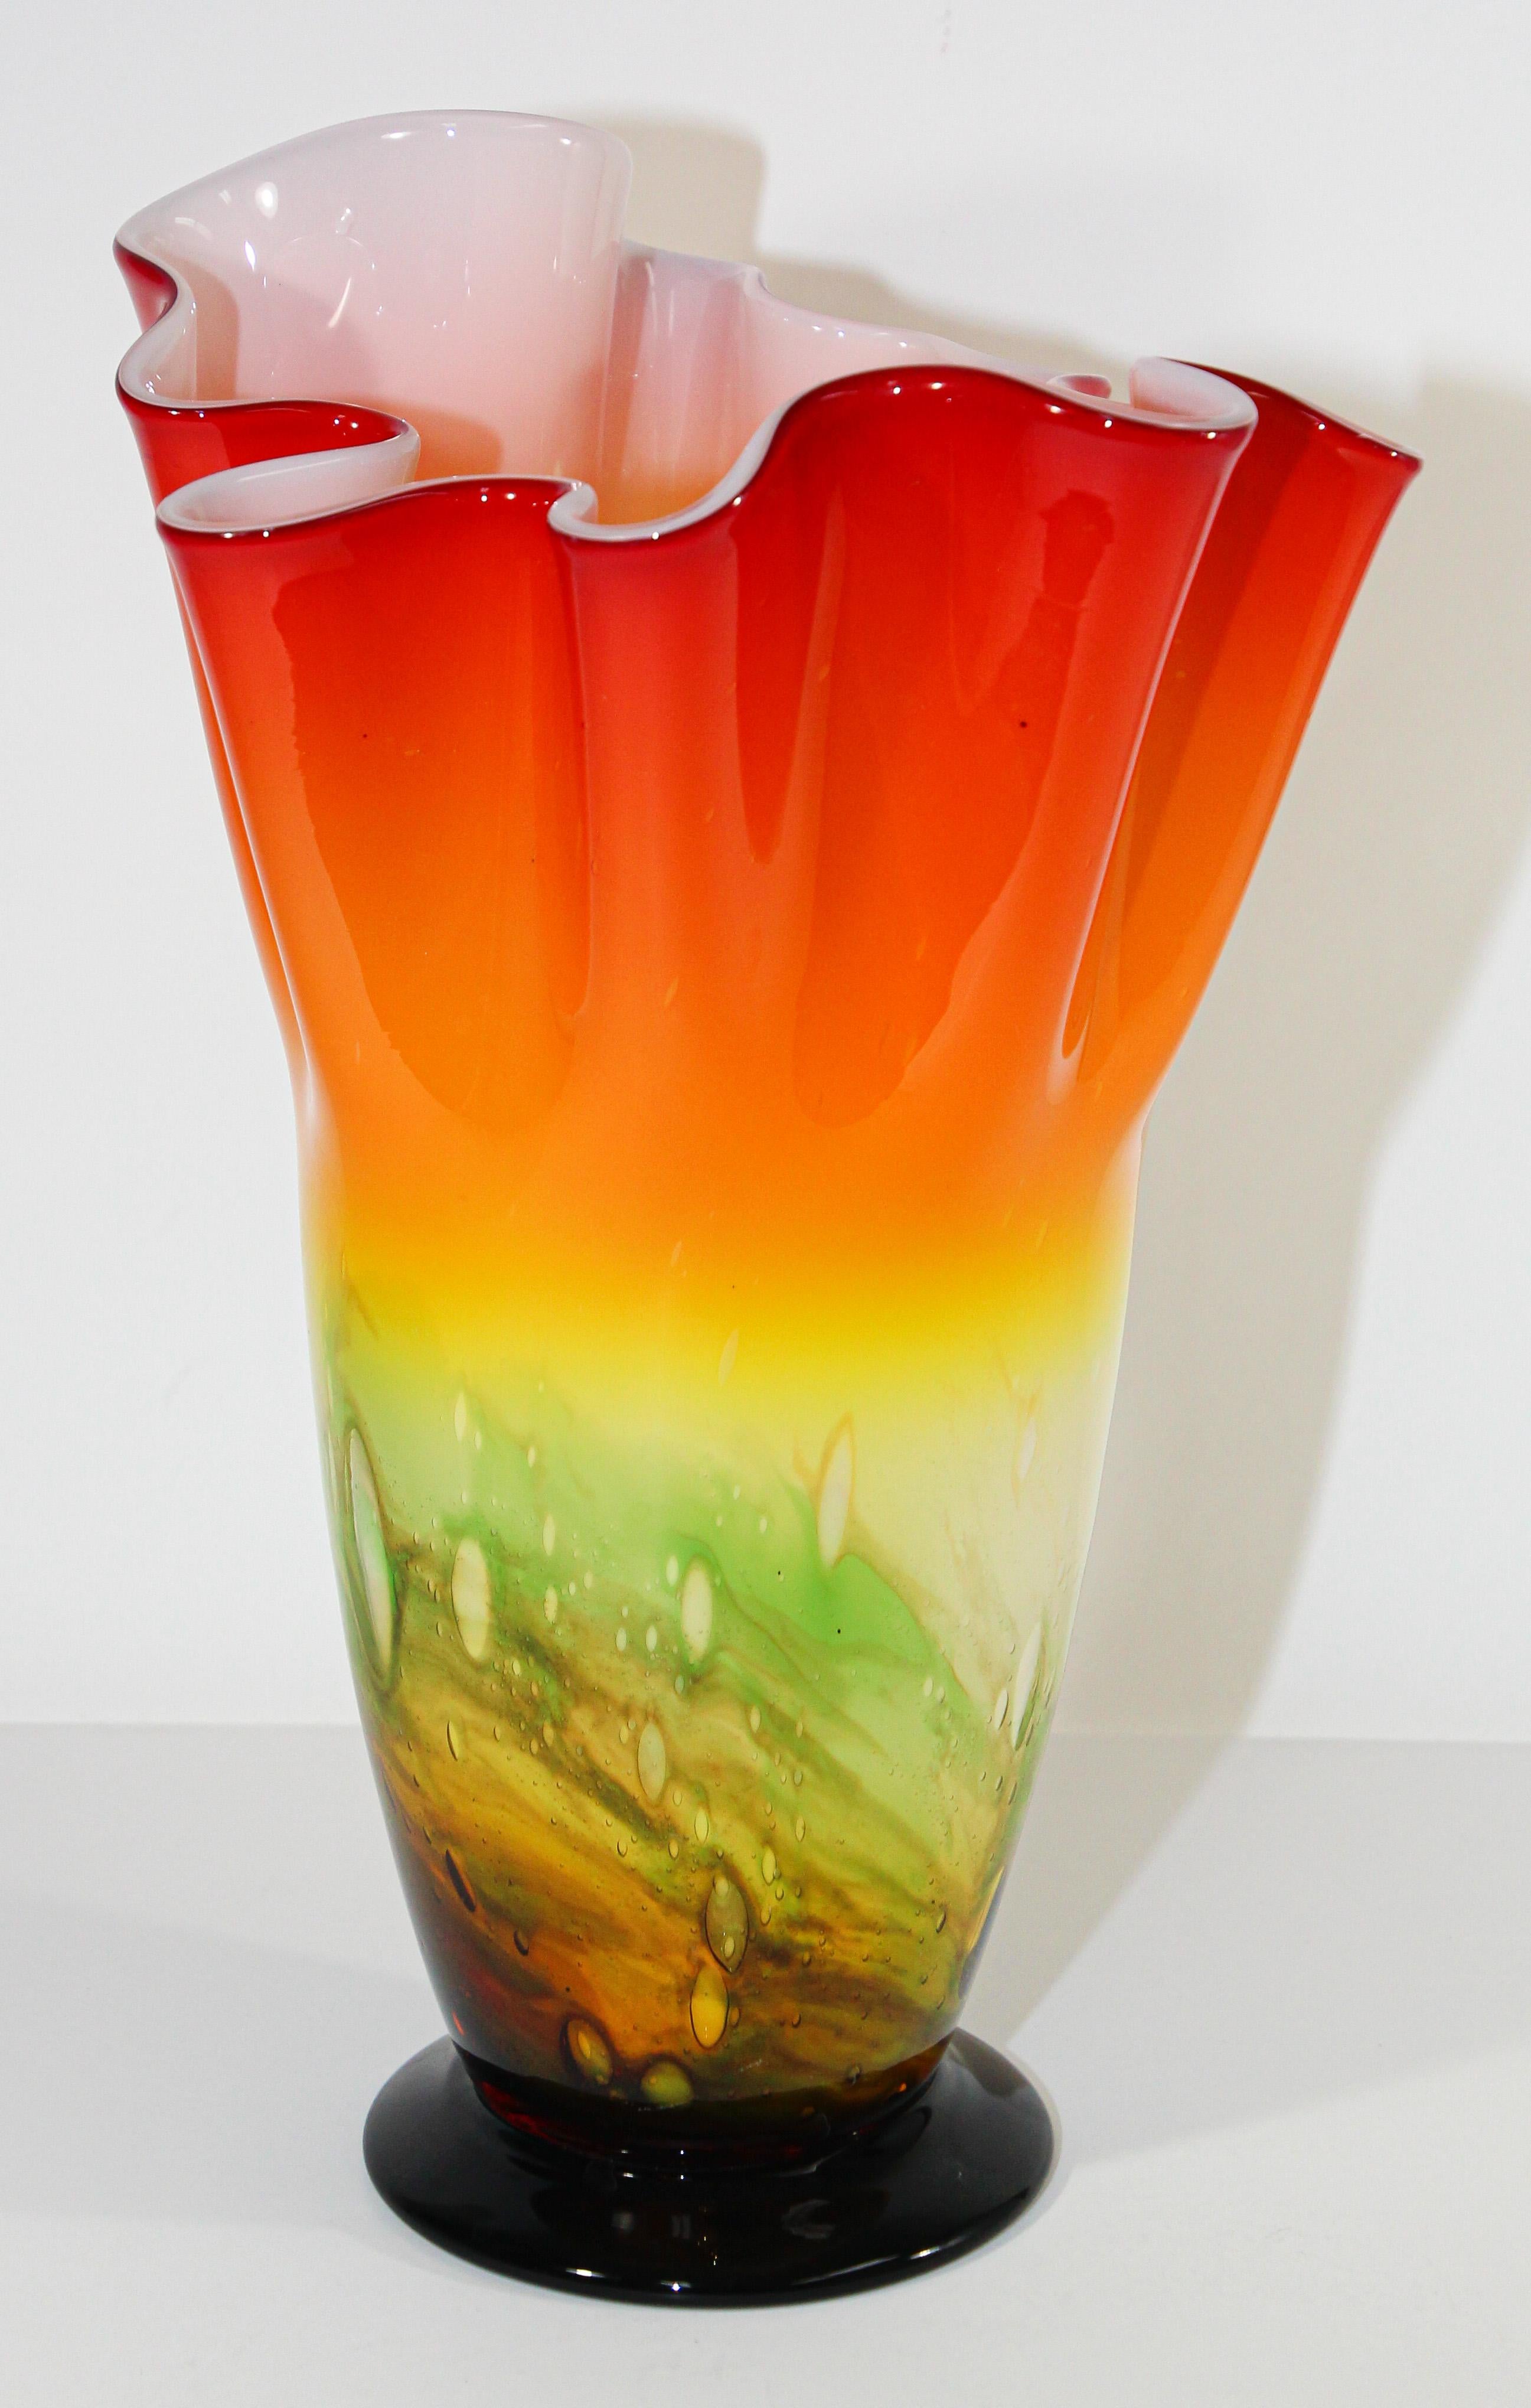 Gorgeous mid-20th century Italian Murano Venetian Fulvio Bianconi style hand blown bright orange art glass decorative Fazzoletto handkerchief footed vase.
Sculptural exquisite vase in organic form with bright orange, green and yellow colors with